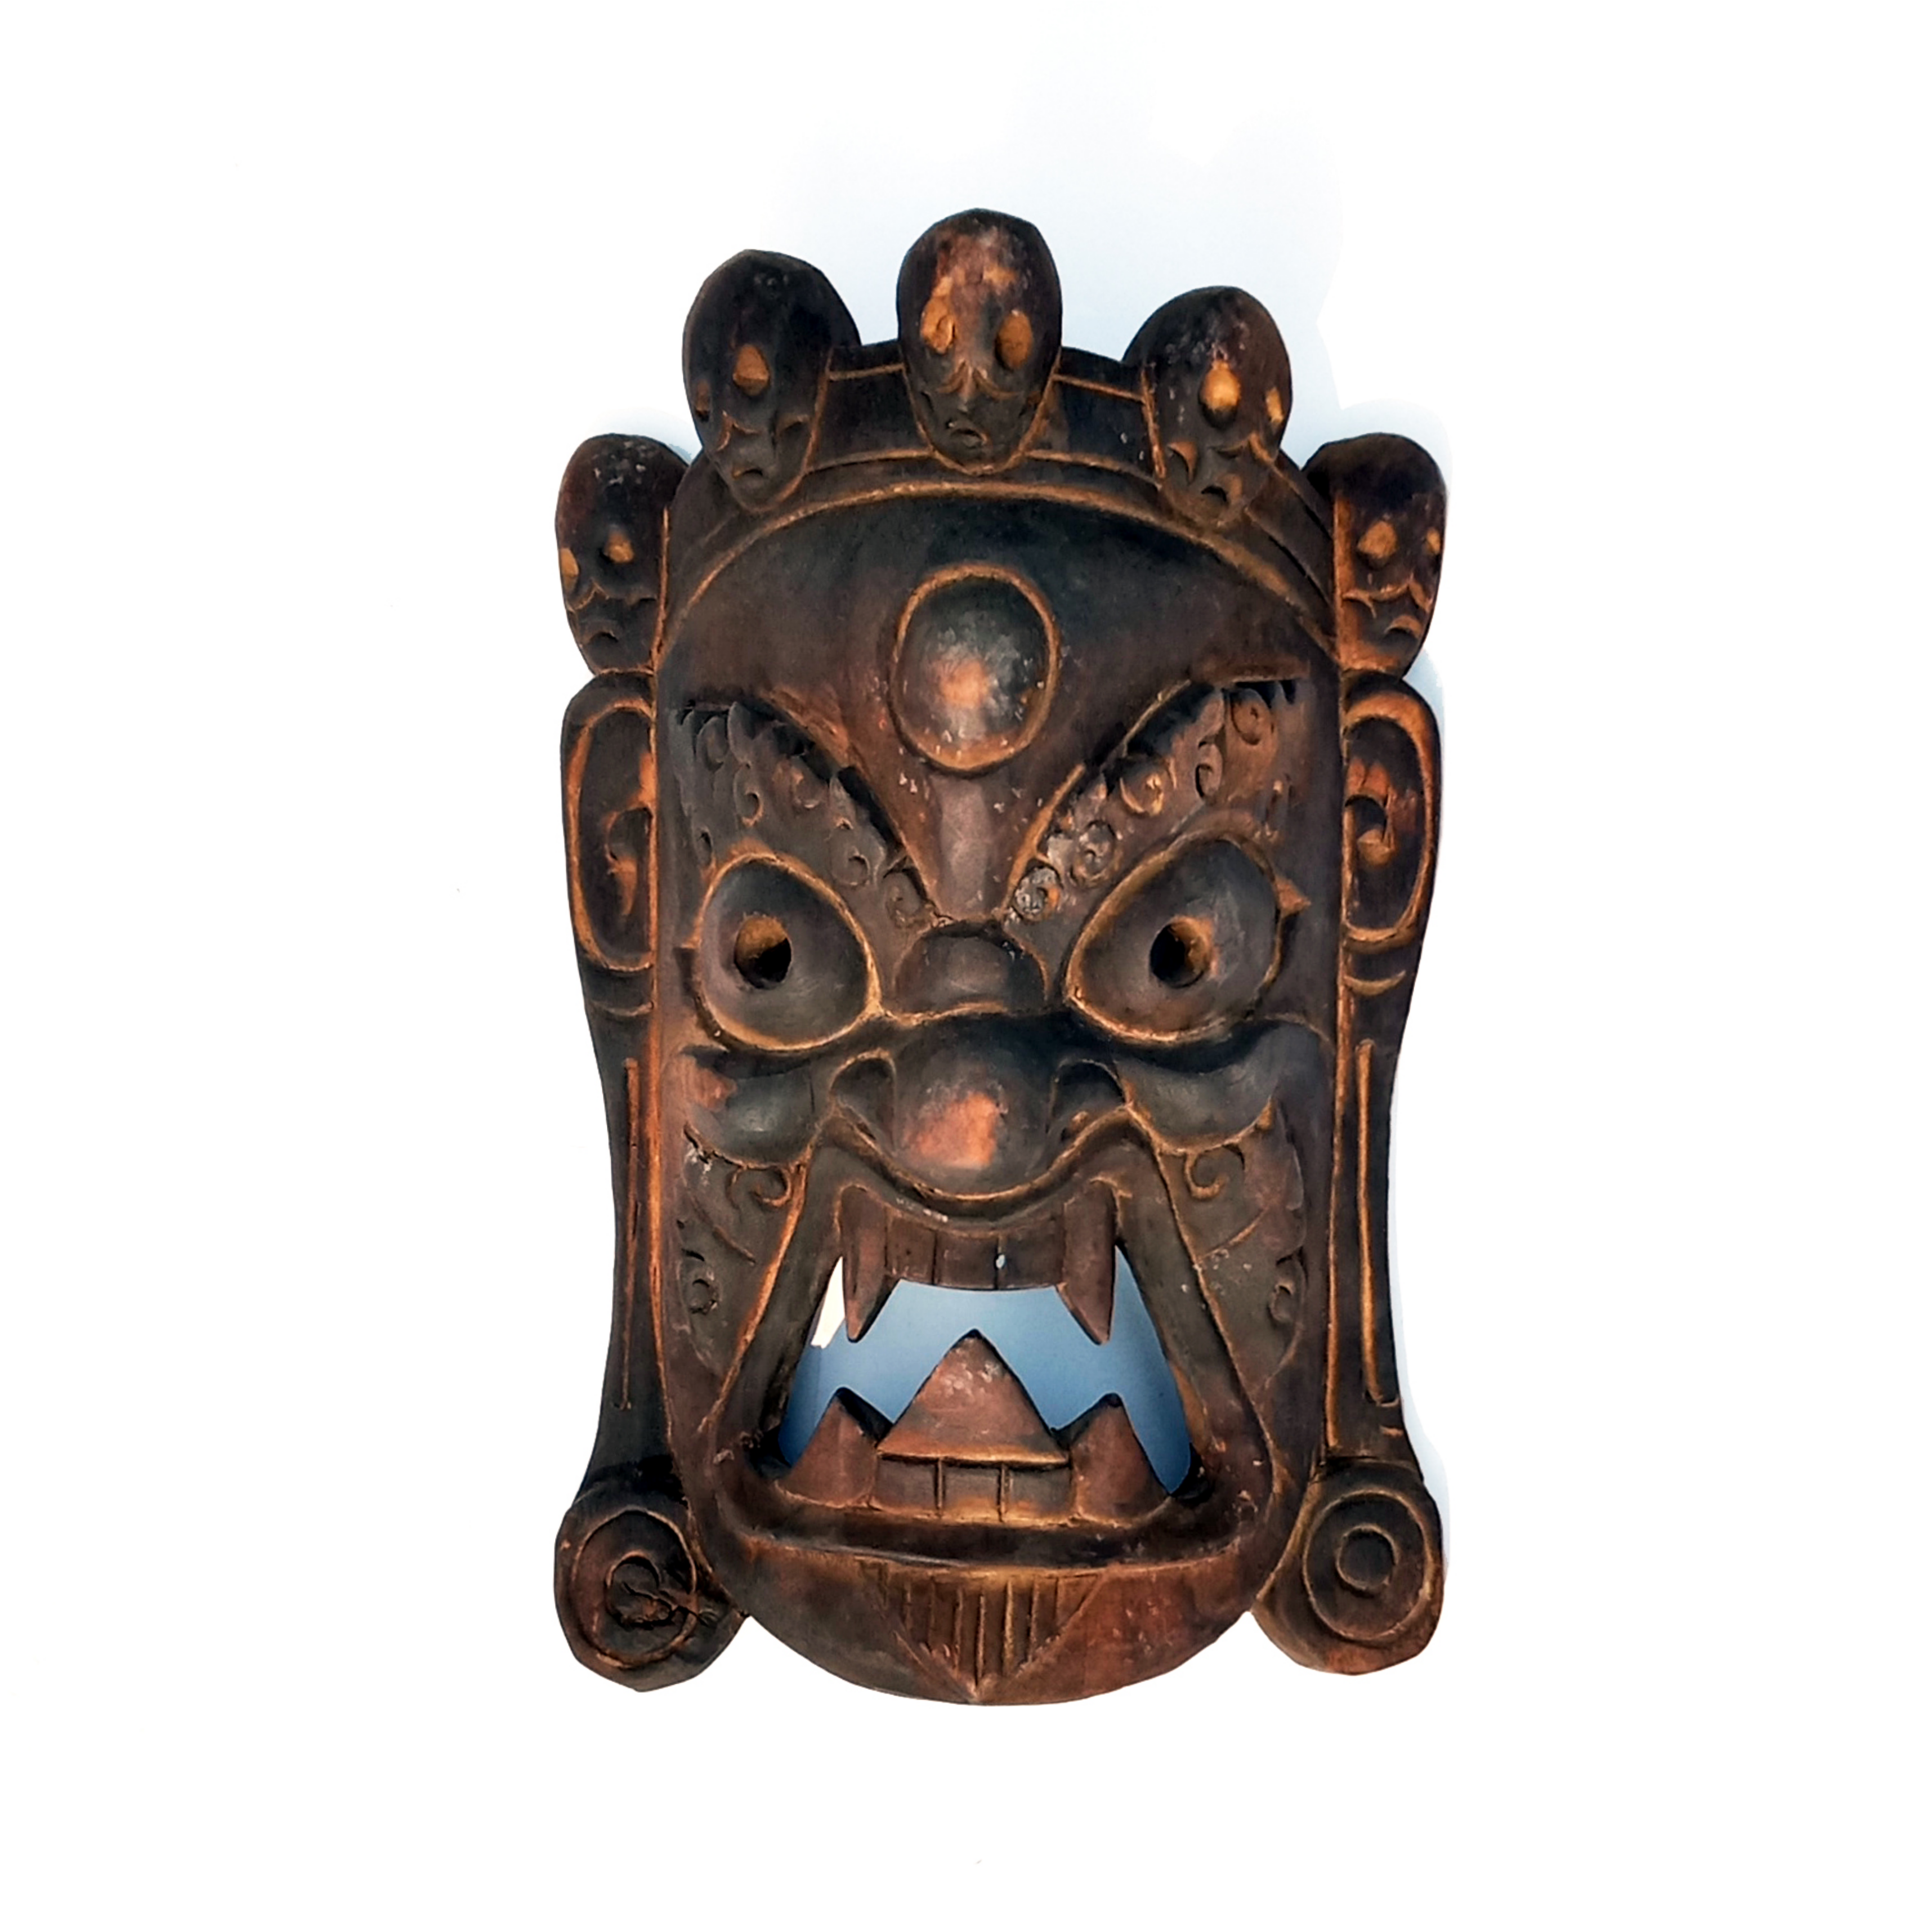 Handcrafted Art Craft Mask Cover Tribal Design Wood Nepal, wall decoration mask